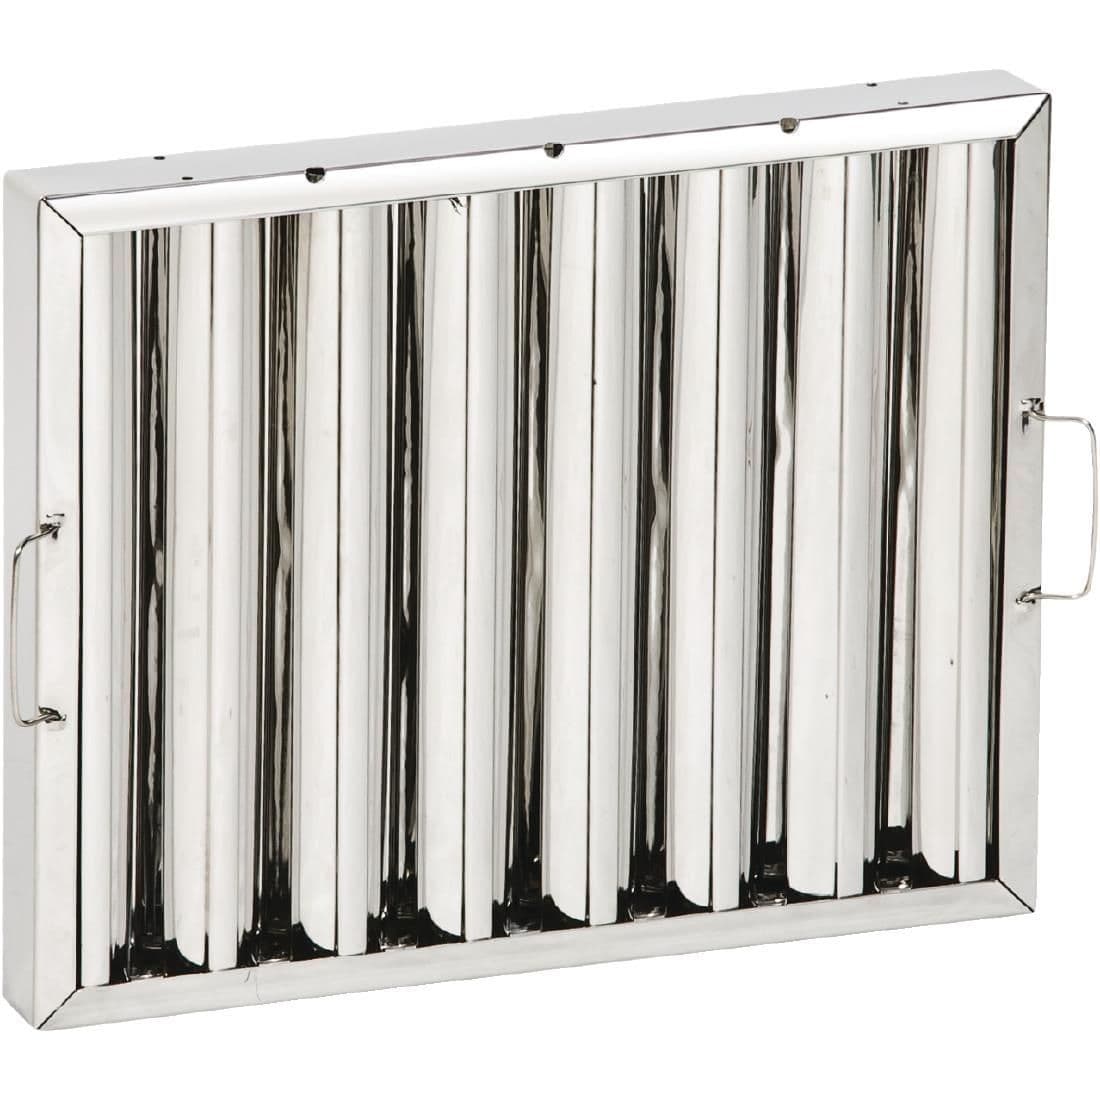 Kitchen Canopy Baffle Filter 400 x 500mm JD Catering Equipment Solutions Ltd